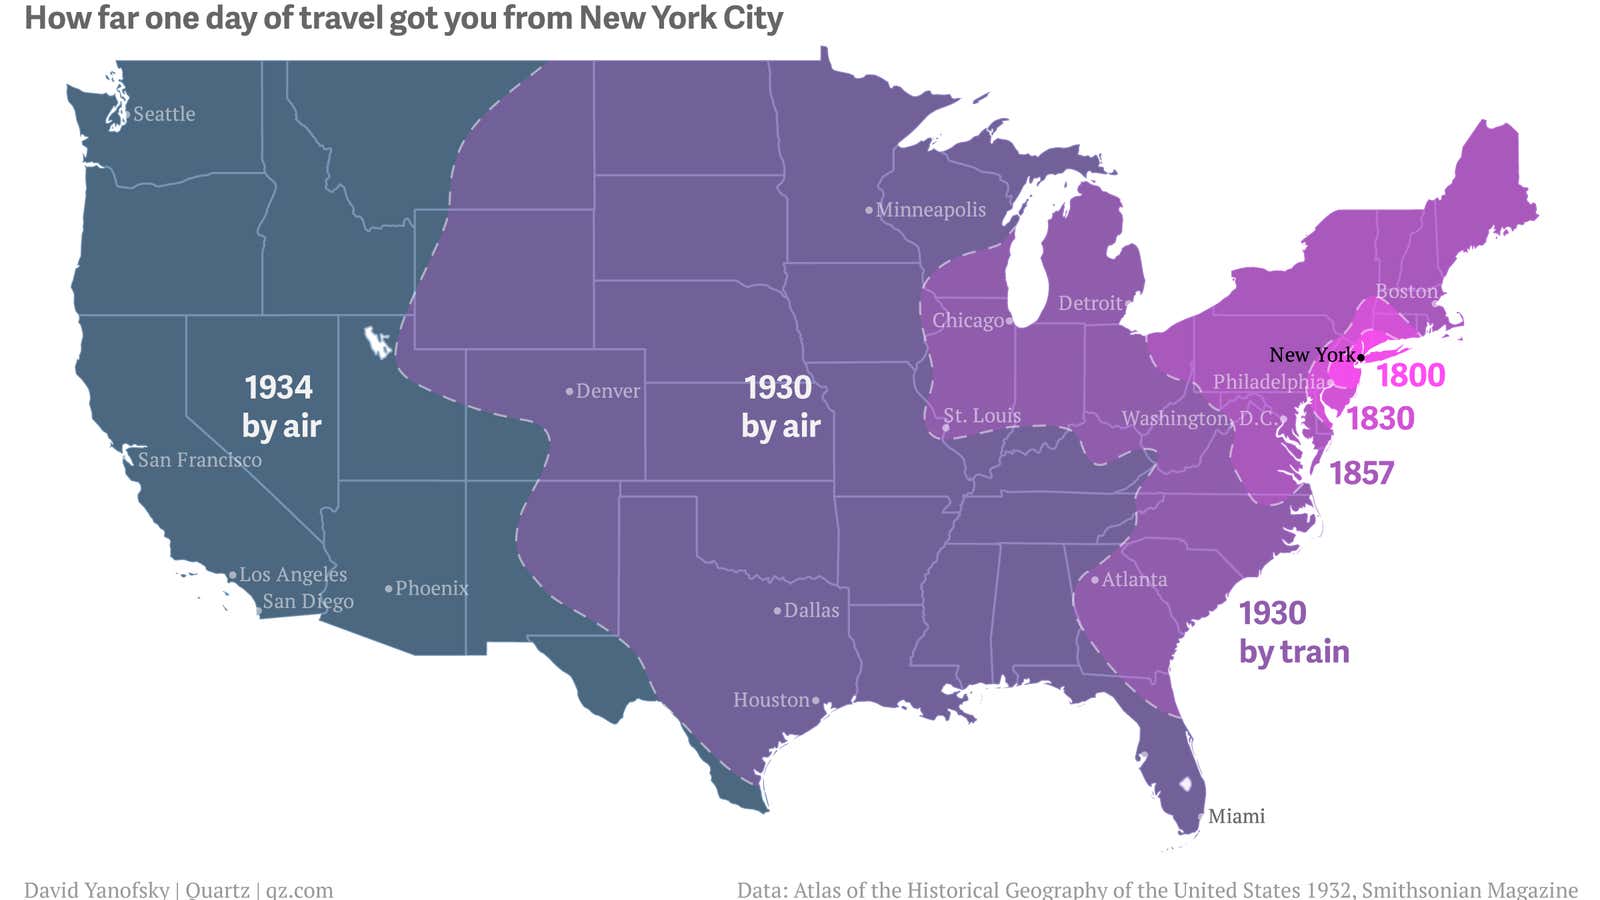 How far you could get from New York in one day—back in the day